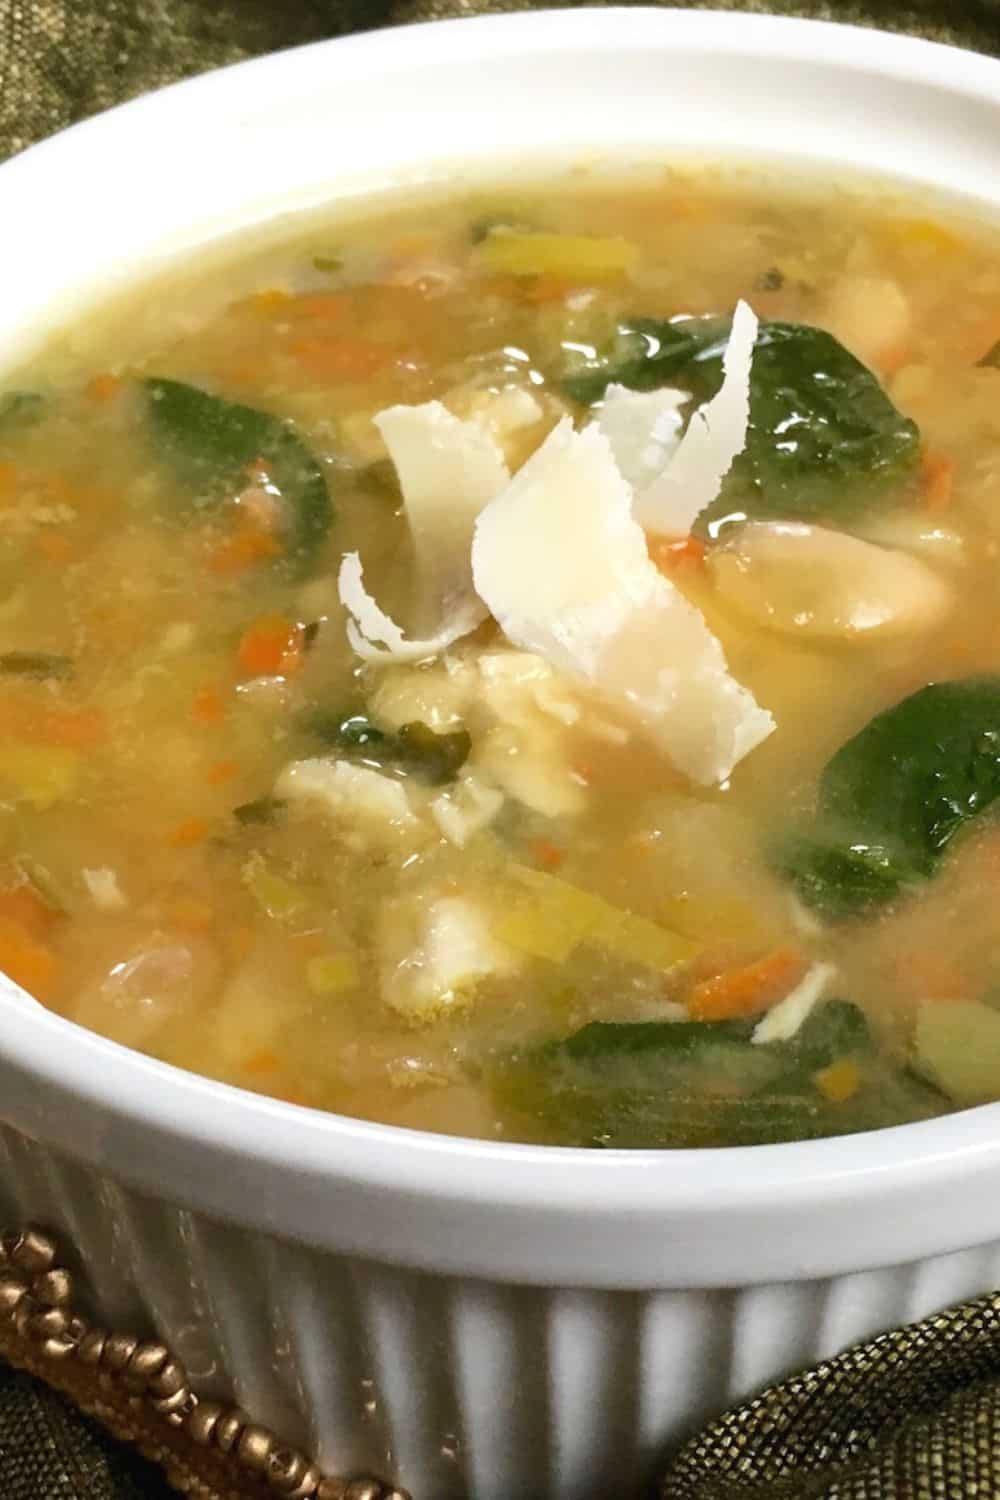 Greens and Beans Spicy Turkey Soup with shaved parmesan